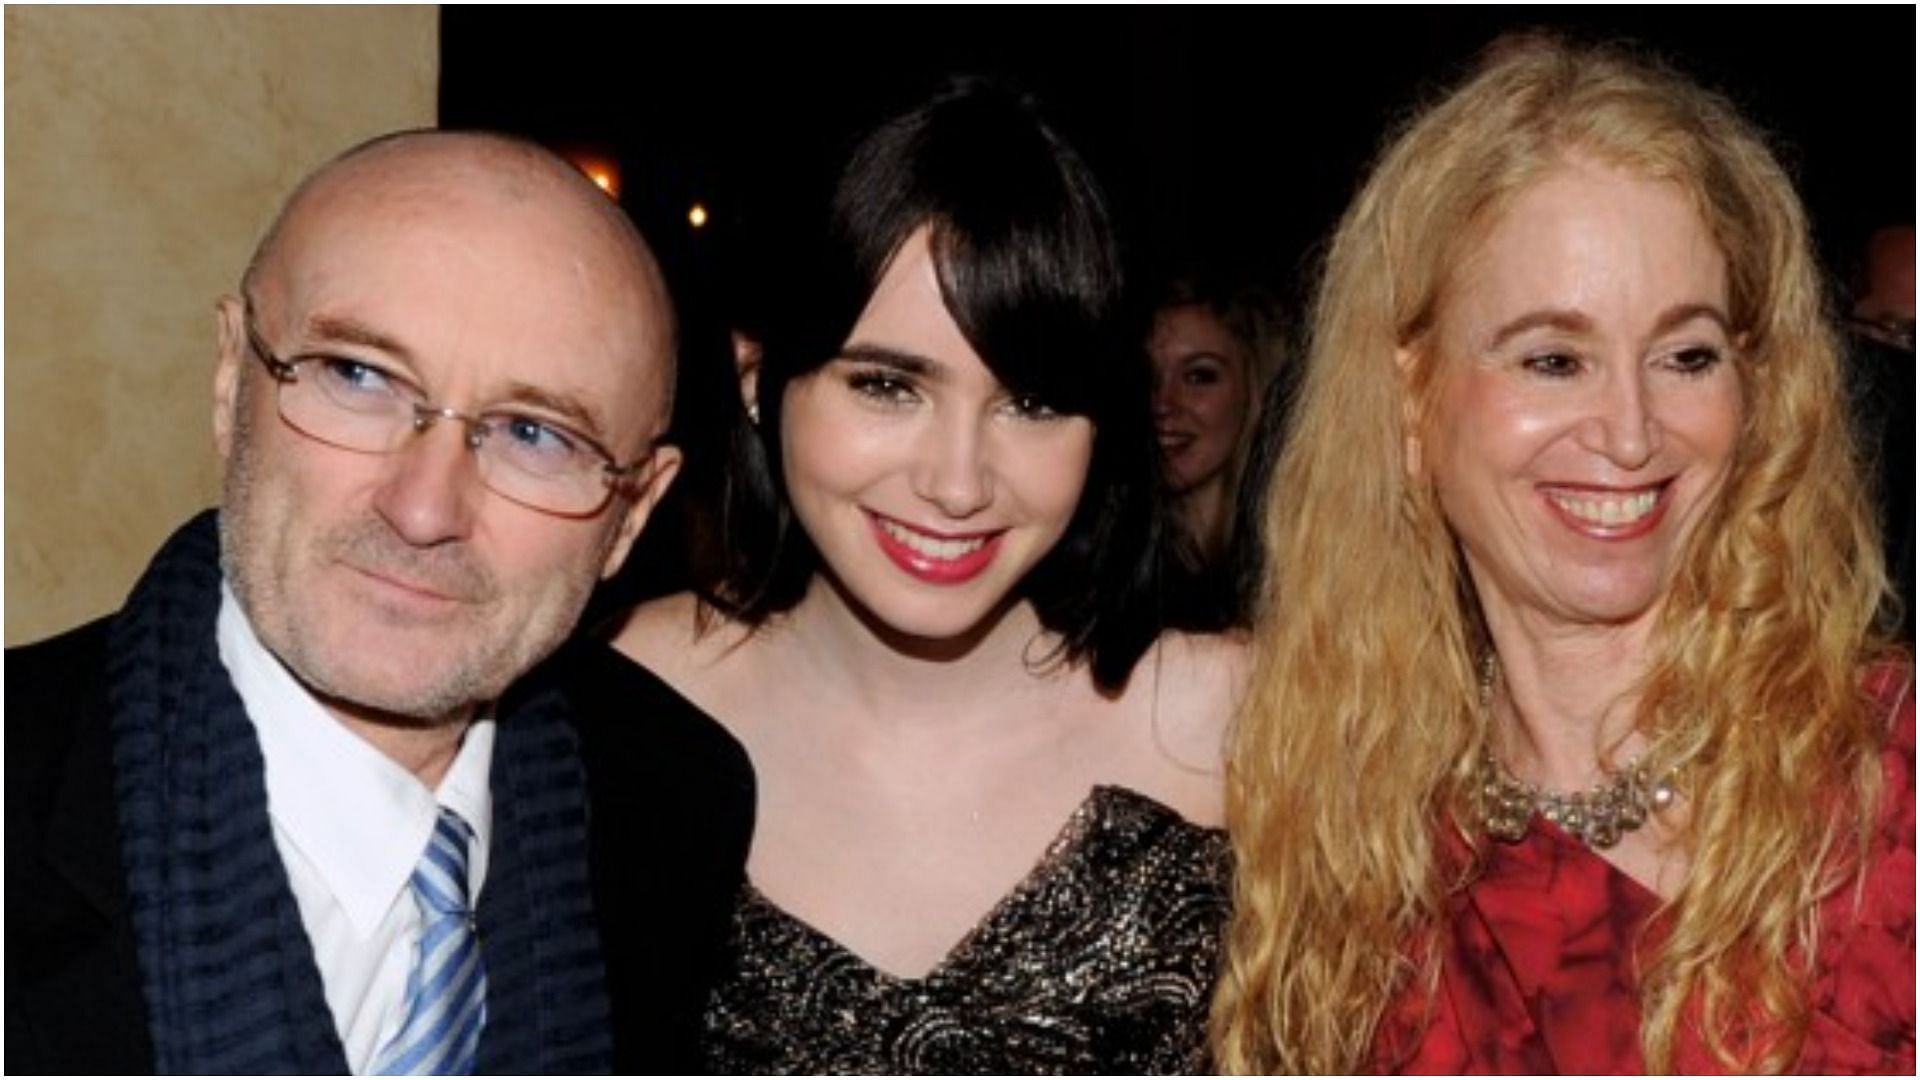 Lily Collins is the daughter of eight-time Grammy winner Phil Collins and architect Jill Tavelman (Image via Getty Images/ Kevin Winter)